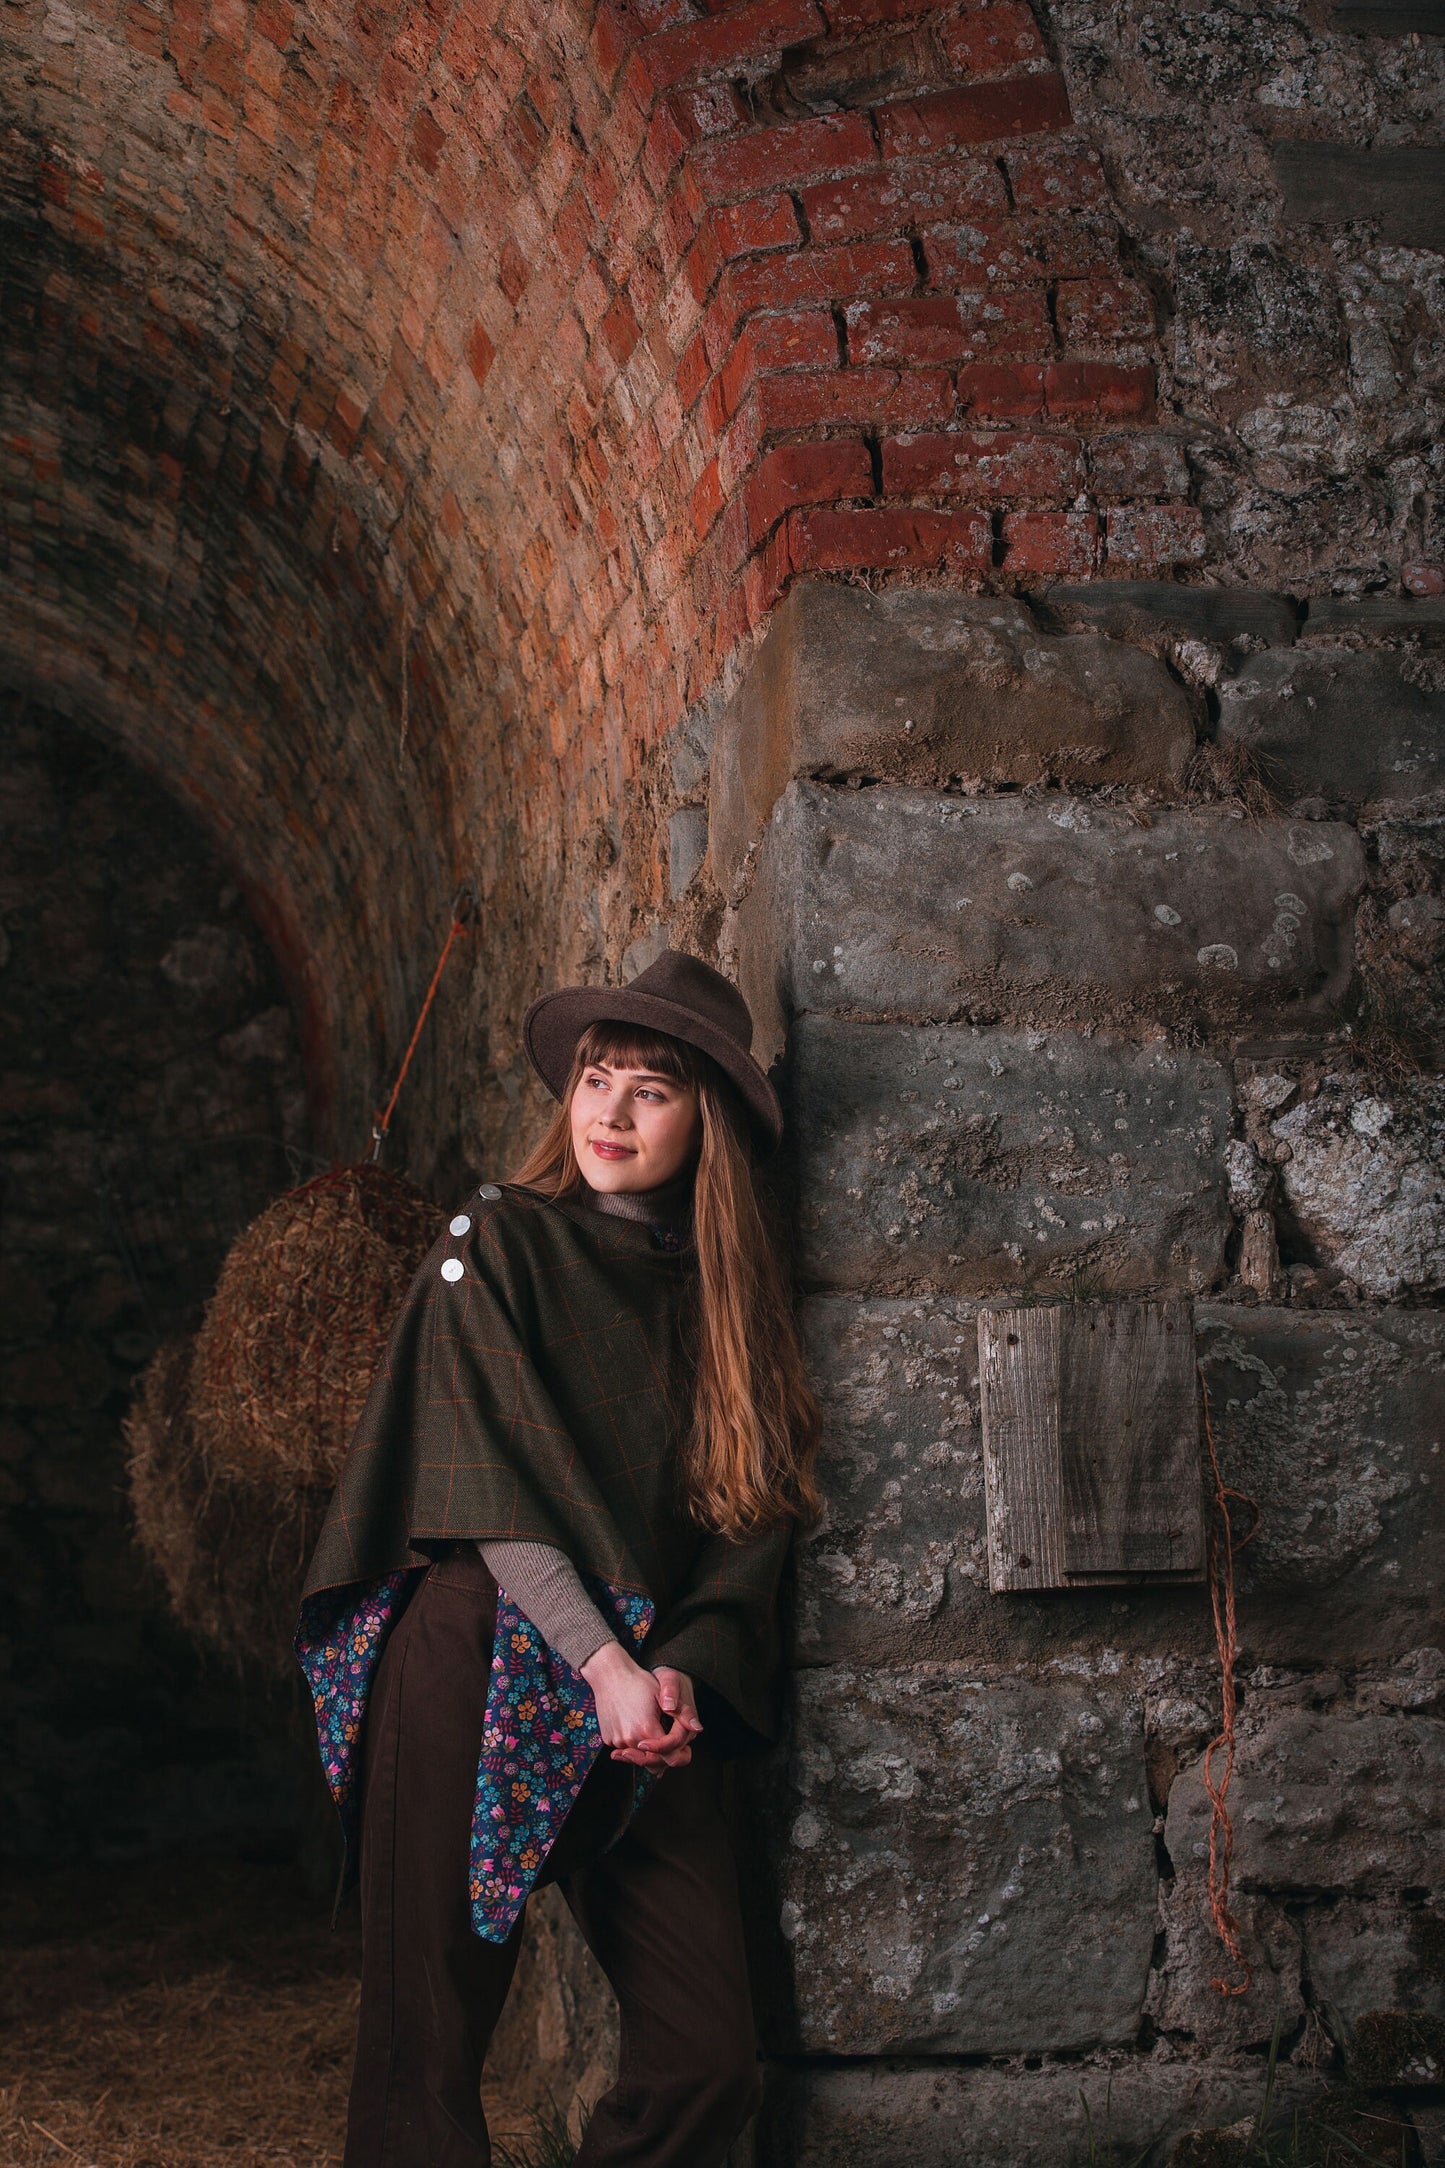 Rich Brown Lovat Tweed Poncho lined with Liberty Fabrics